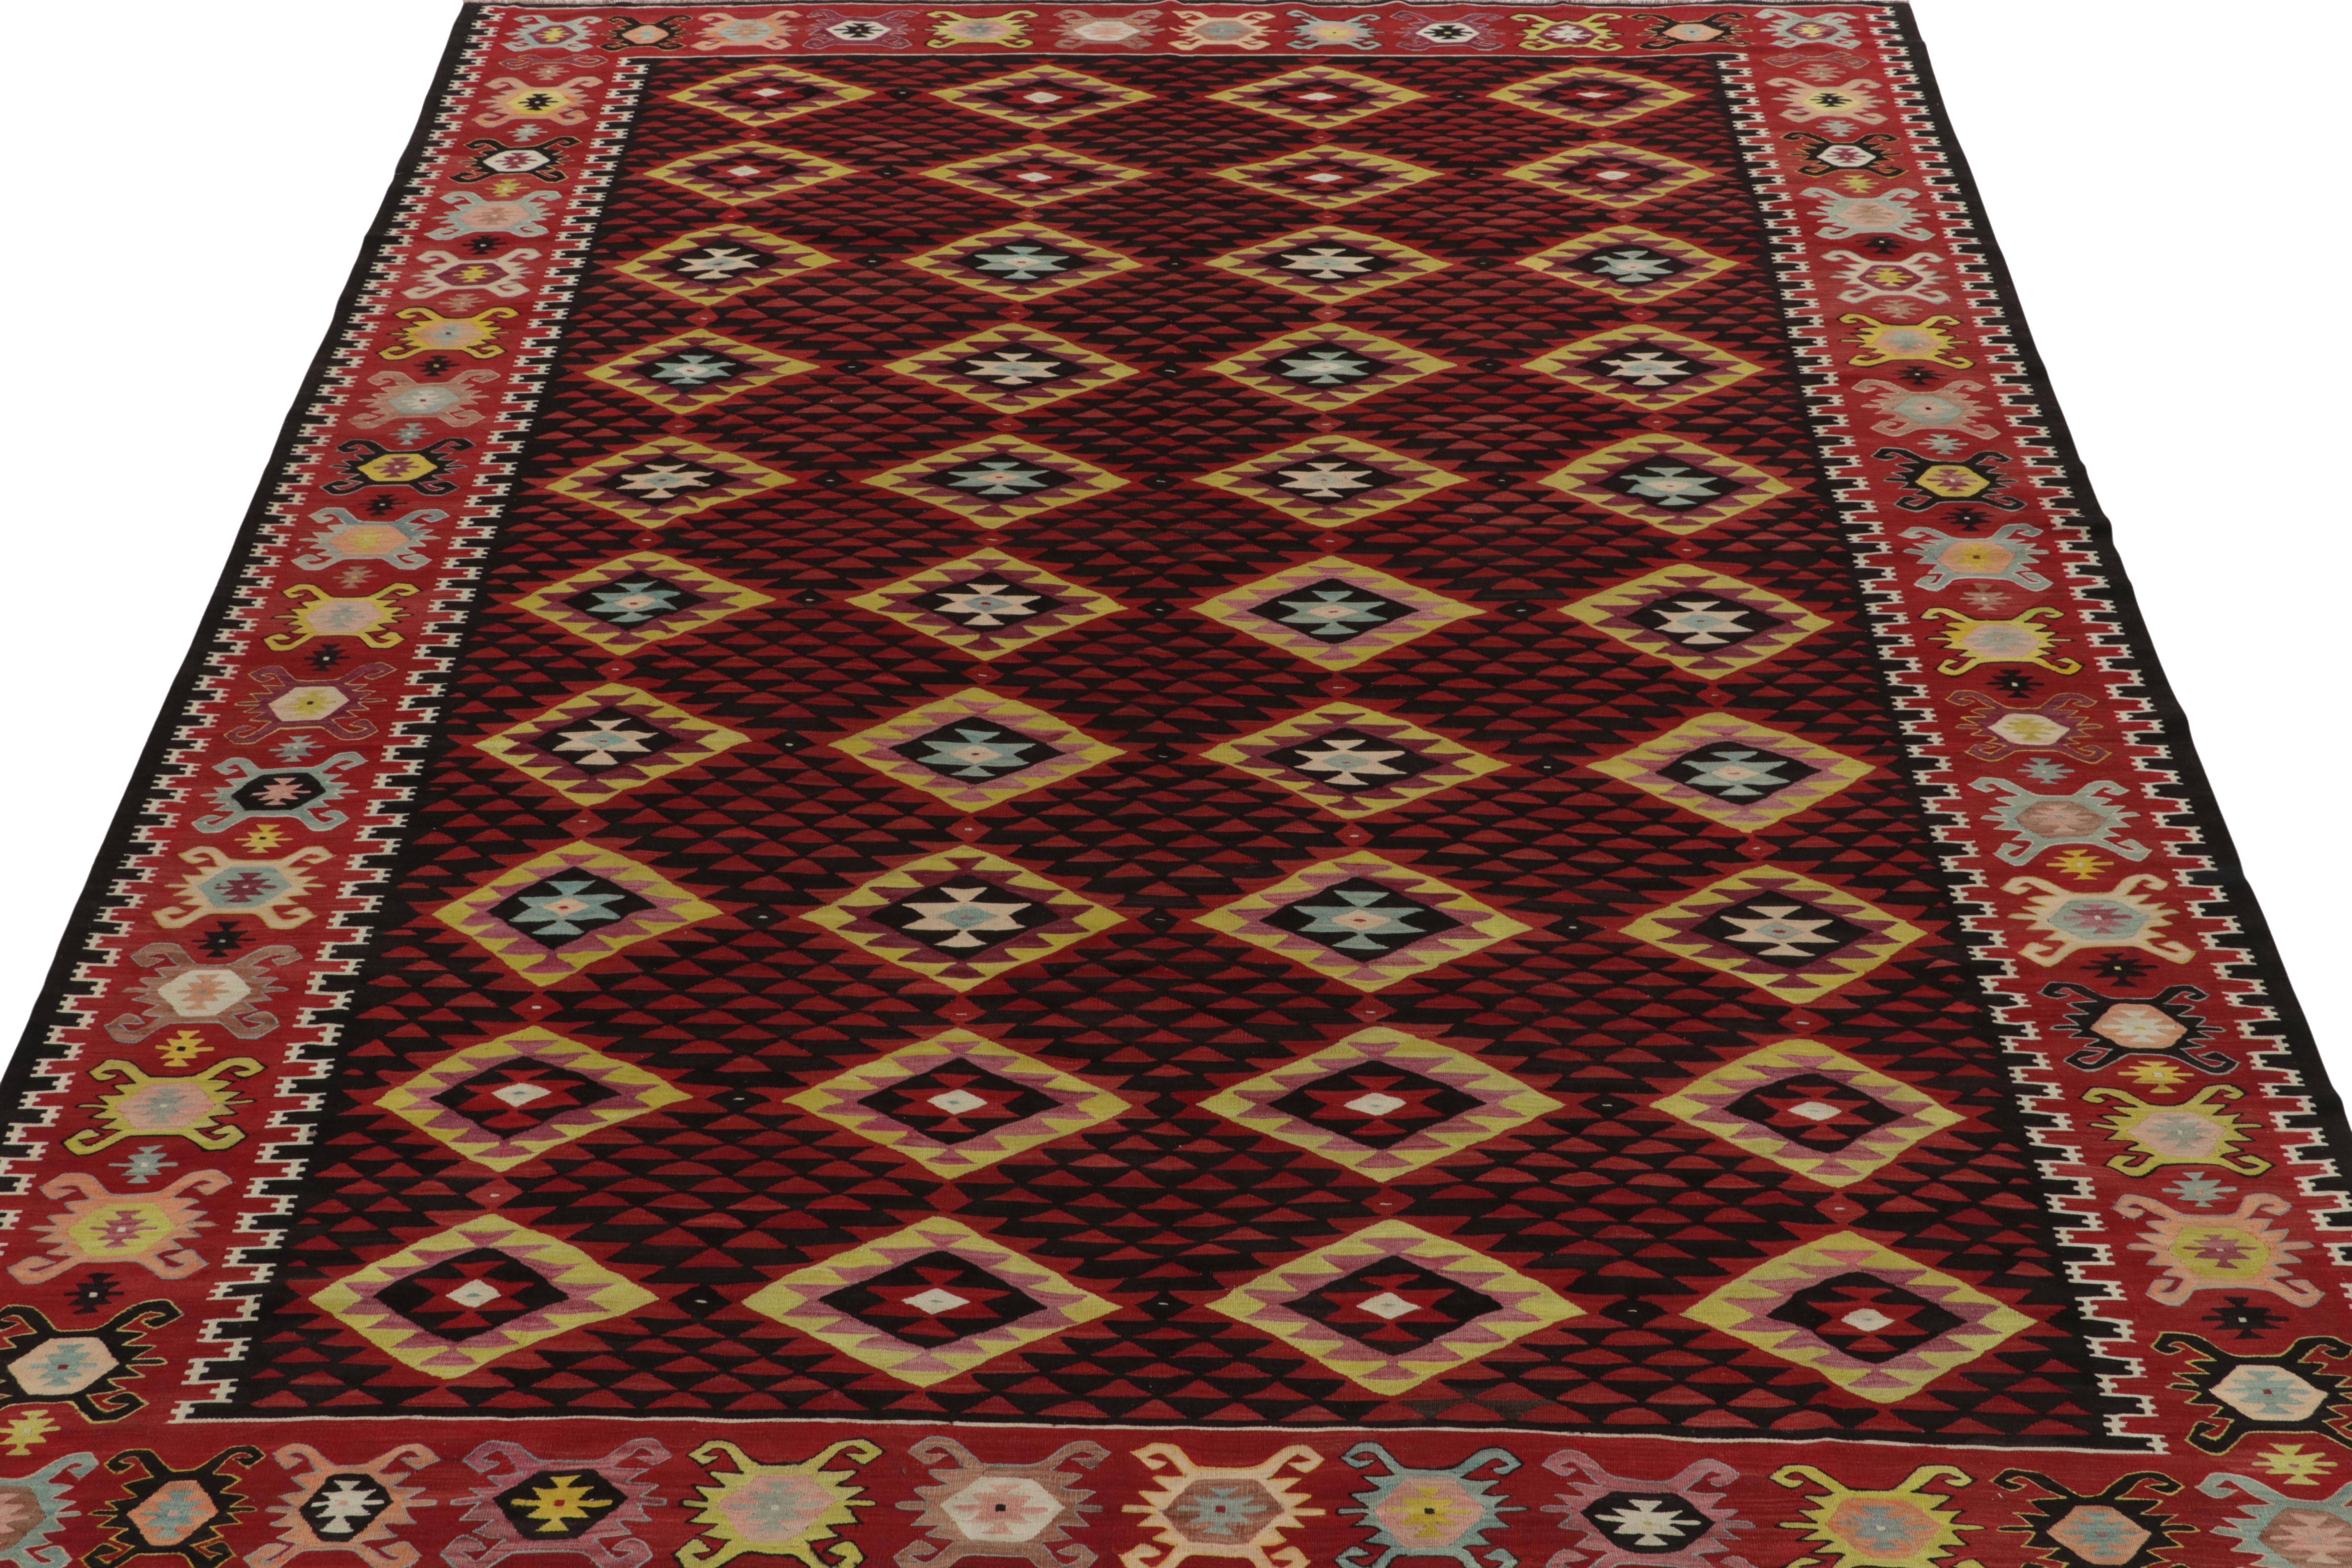 Handwoven in fine wool, a 10x12 antique kilim rug from believed to be of rare Macedonian origin circa 1920-1930. 

Sometimes called Thracian among scholars of Thrace-Macedonia, the design reflects a flamboyant approach in tribal design with